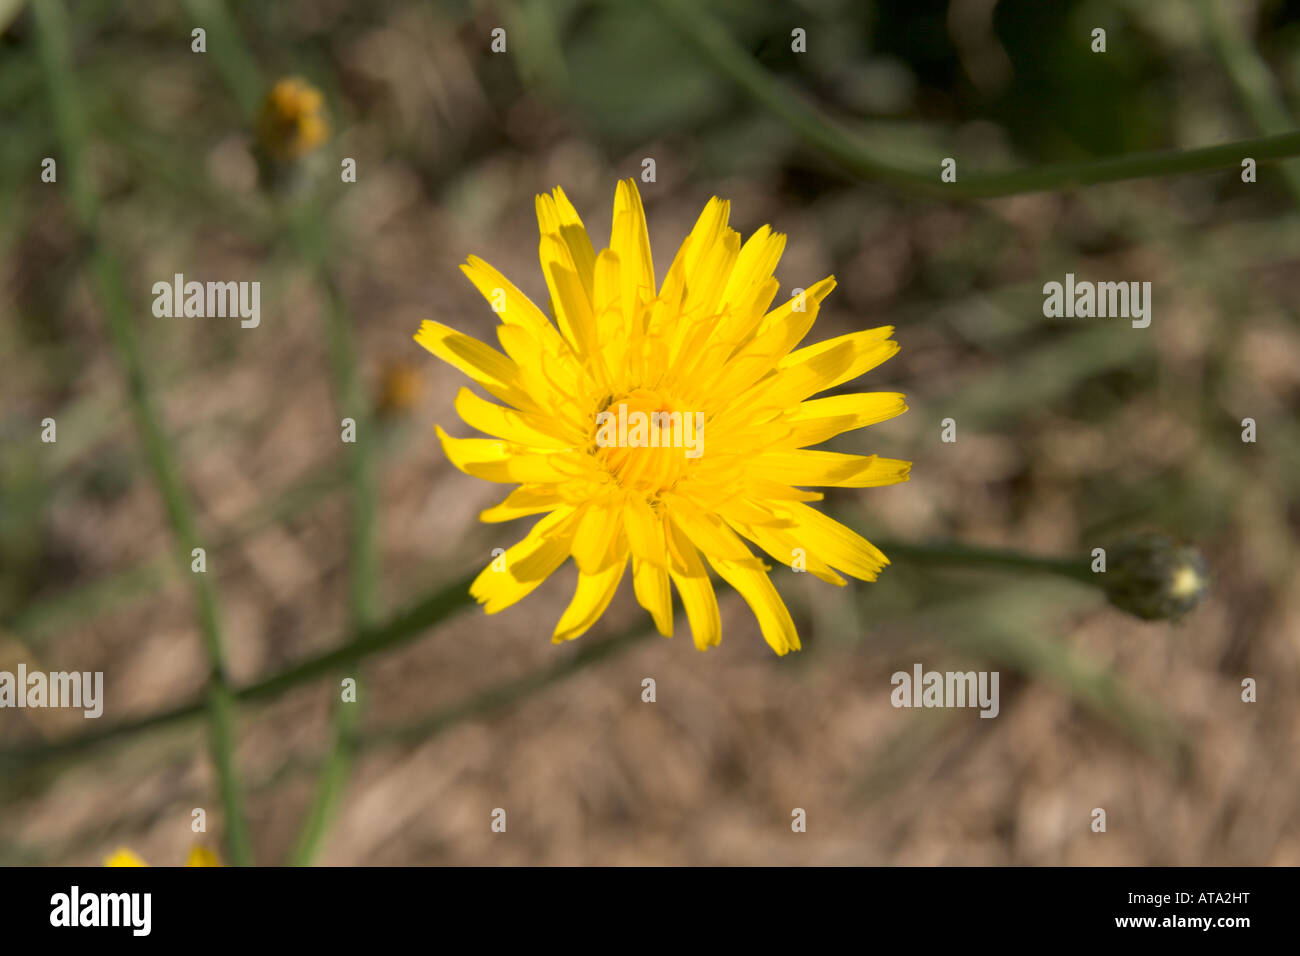 Close-up of a common dendelion flower with a blurred background of brown grass. Stock Photo